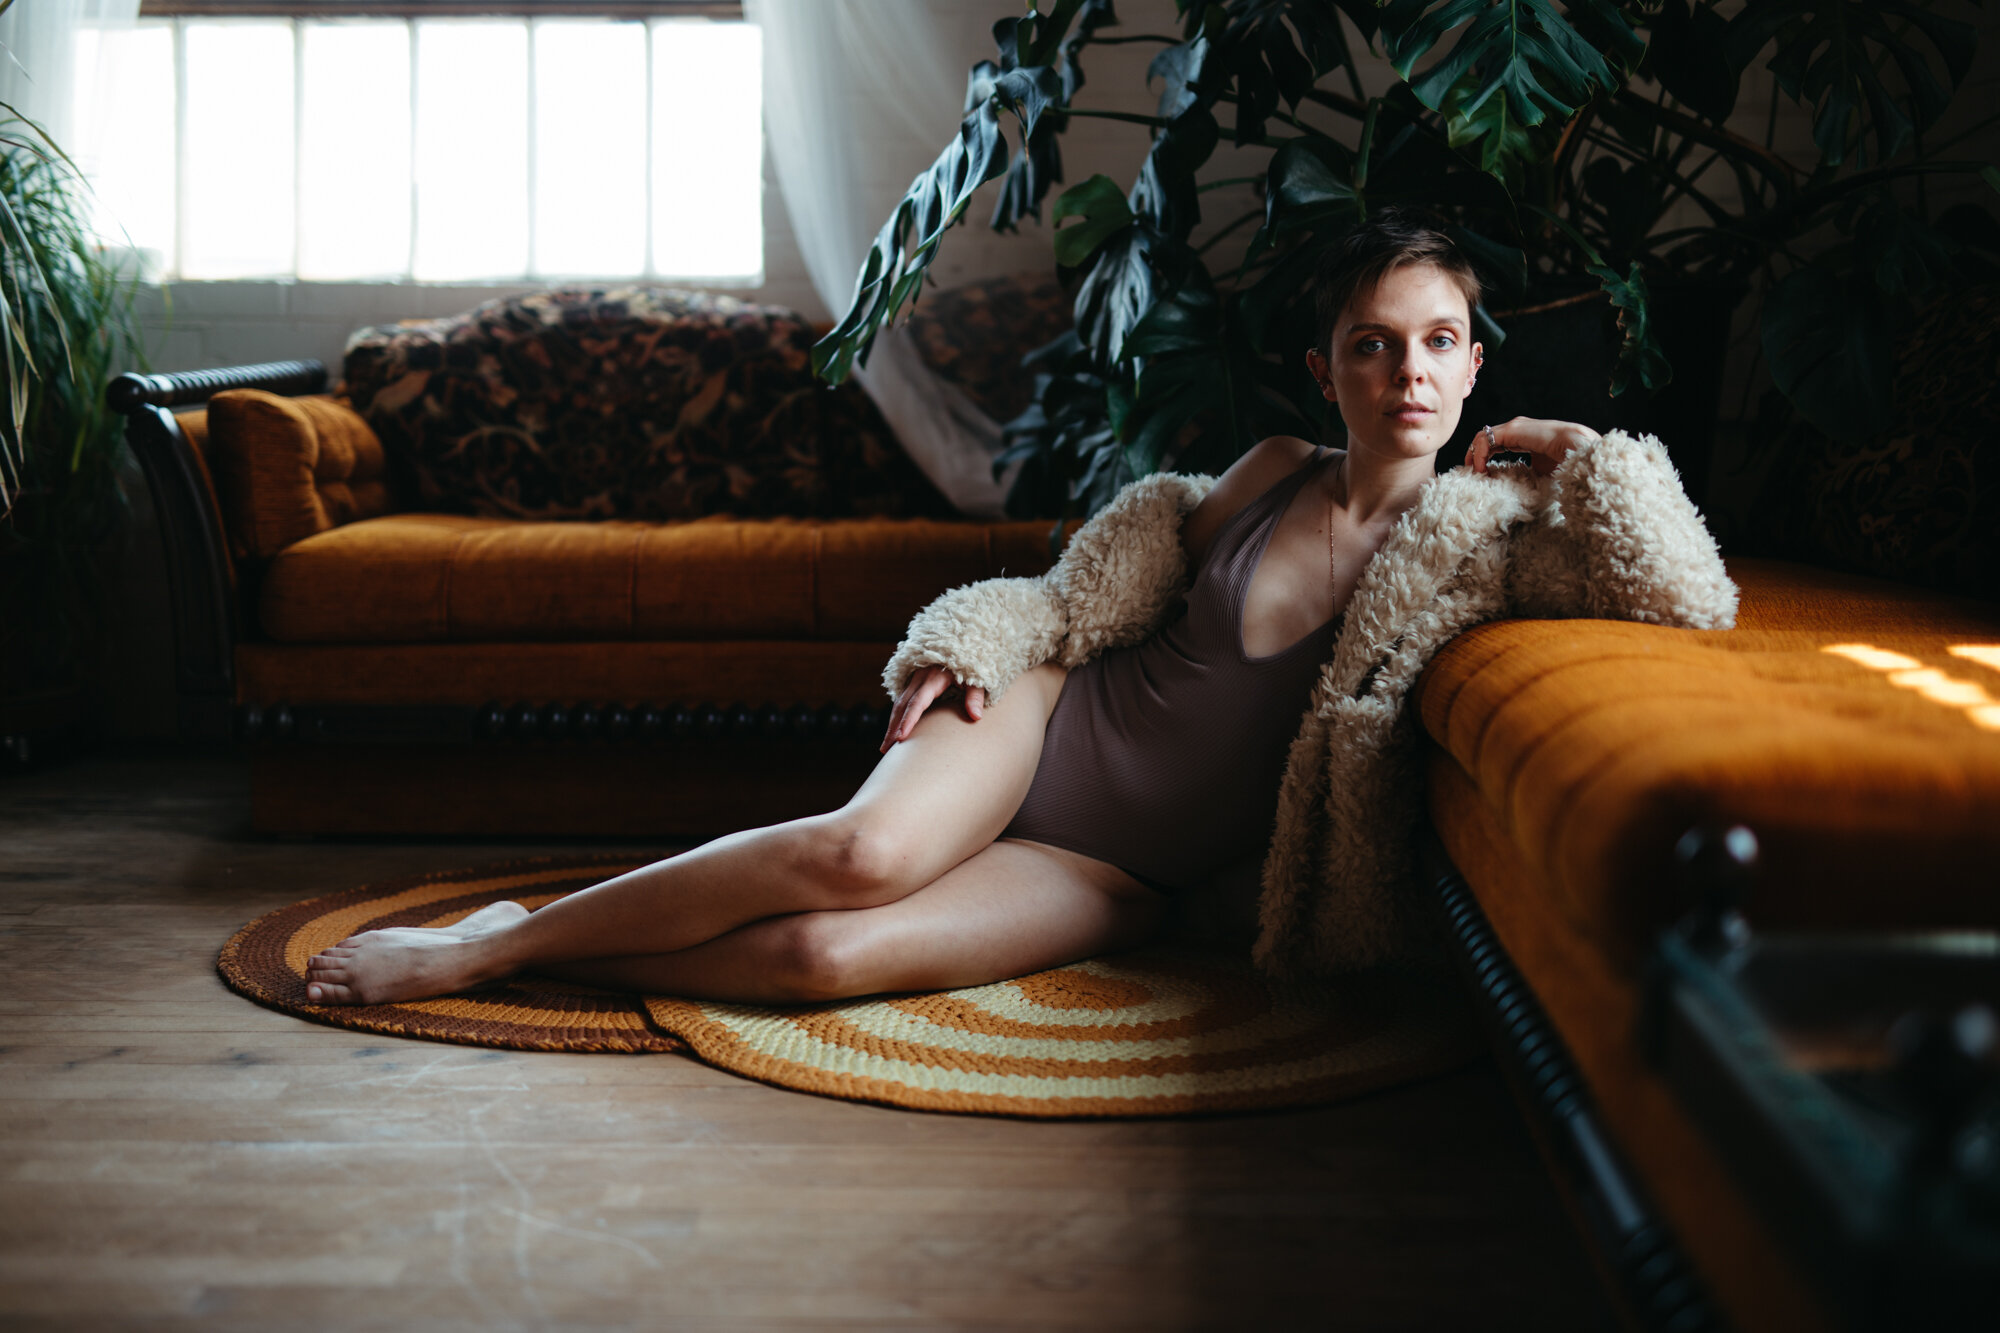 70's style queer boudoir photo of person draped over a vintage orange couch wearing a fuzzy coat